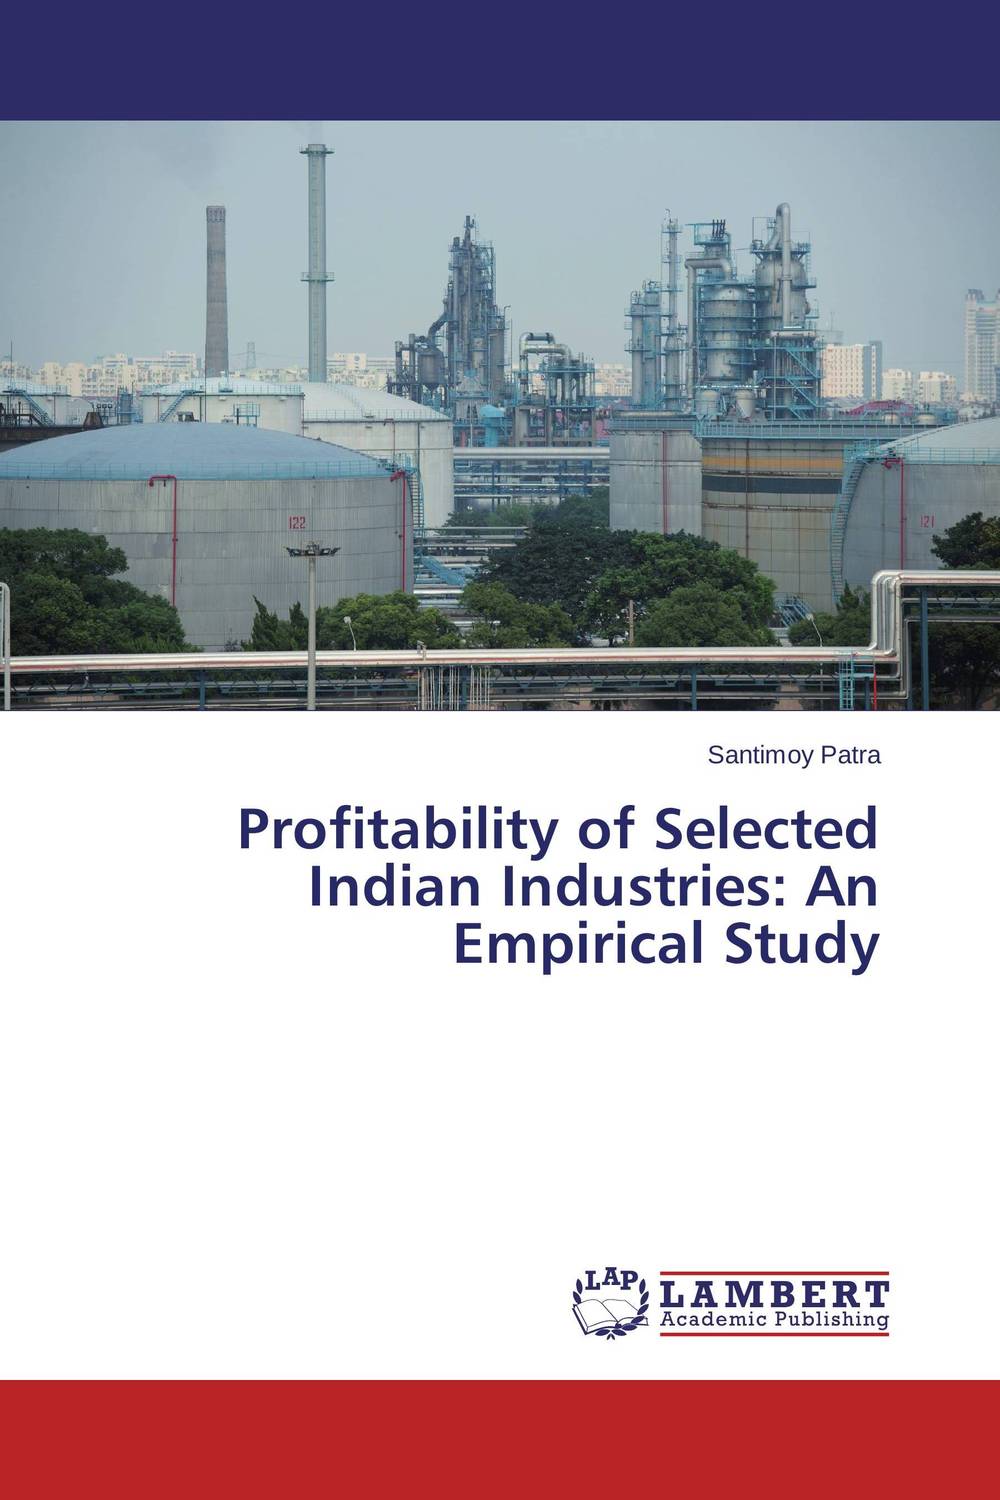 Profitability of Selected Indian Industries: An Empirical Study